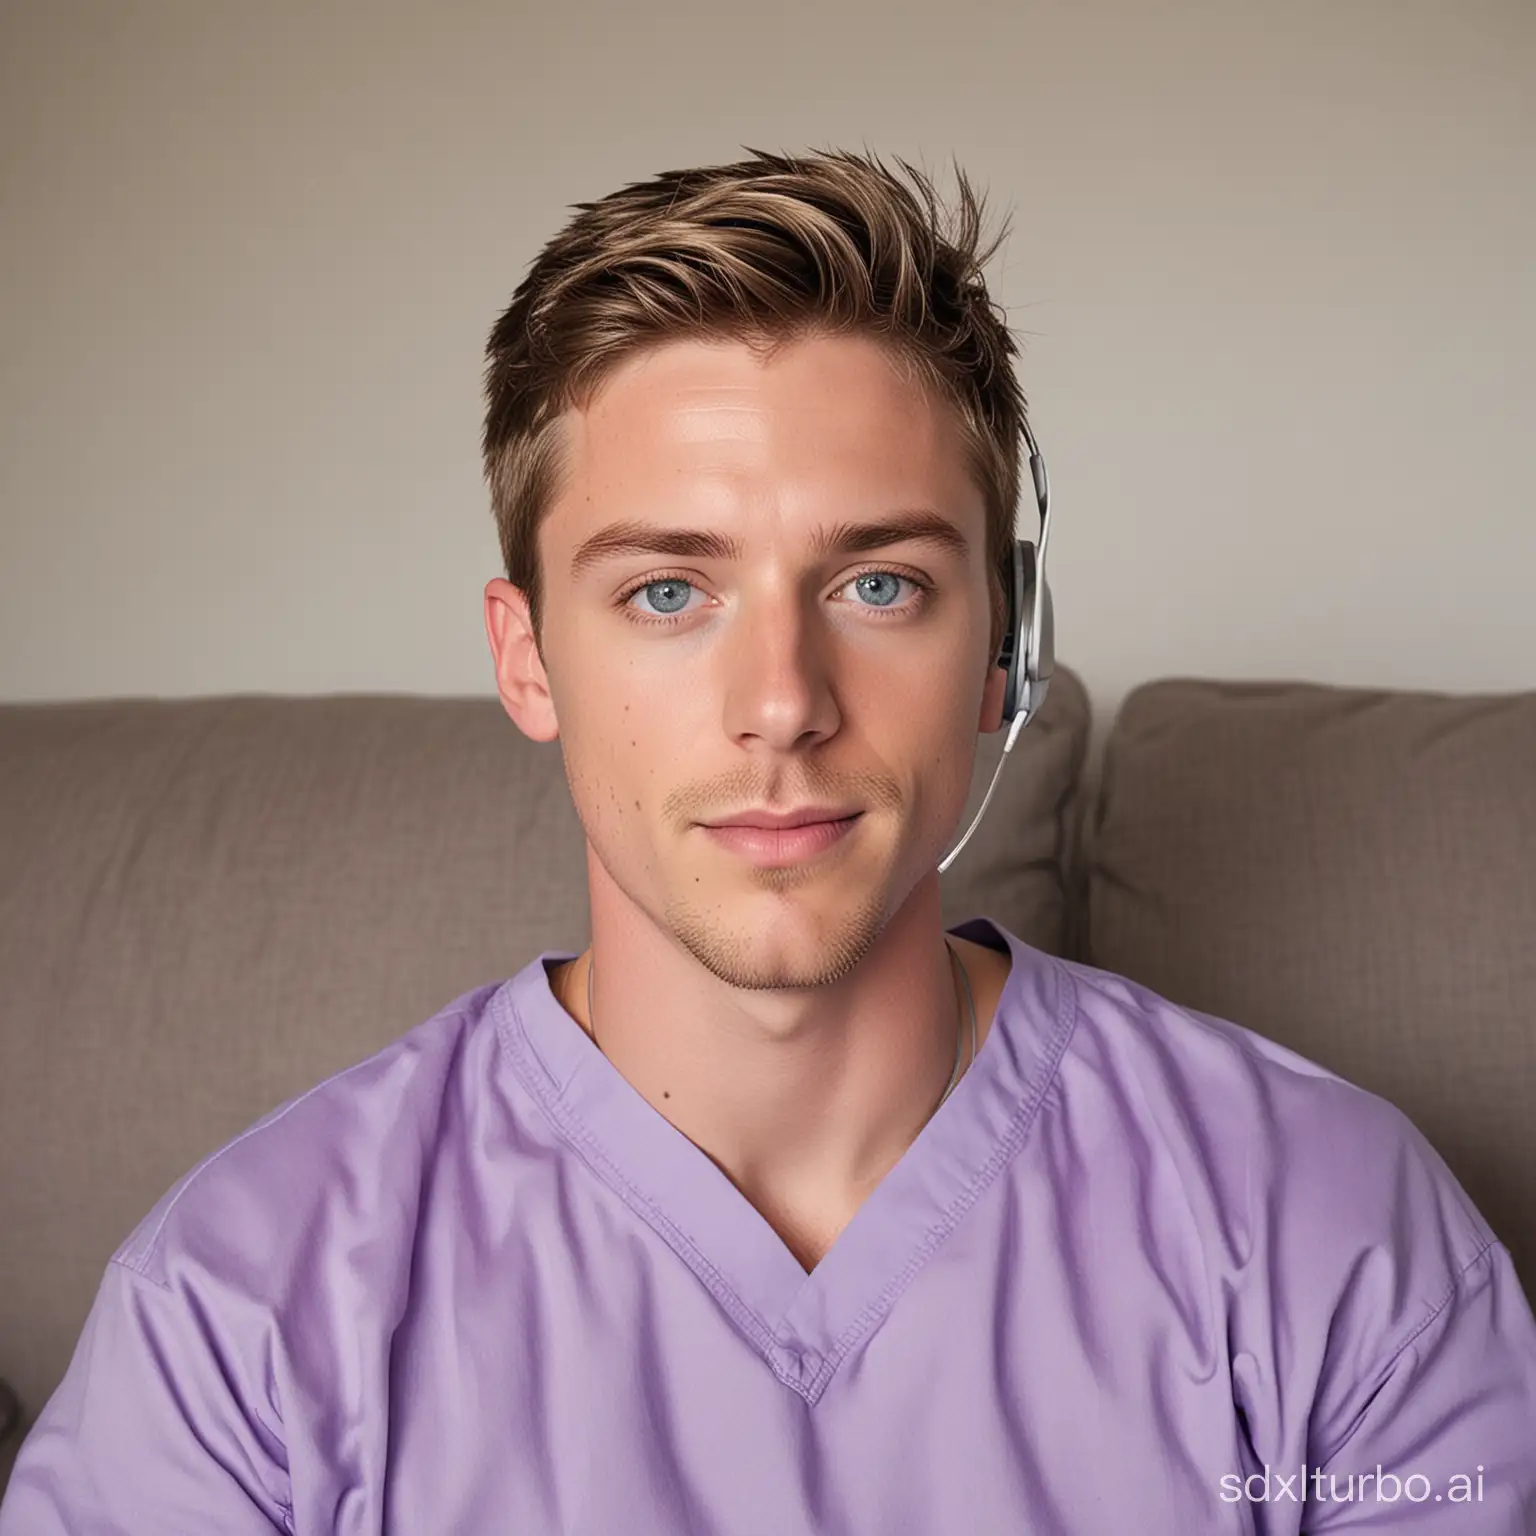 27-year-old male with an oval and slightly elongated face, short blond hair, and blue eyes. He’s not smiling and is looking straight at the camera. He’s dressed in vibrant purple scrubs, sitting comfortably on a sofa with wireless white headphones, enjoying some music. The backdrop is solid and provides a nice contrast to his purple scrubs.